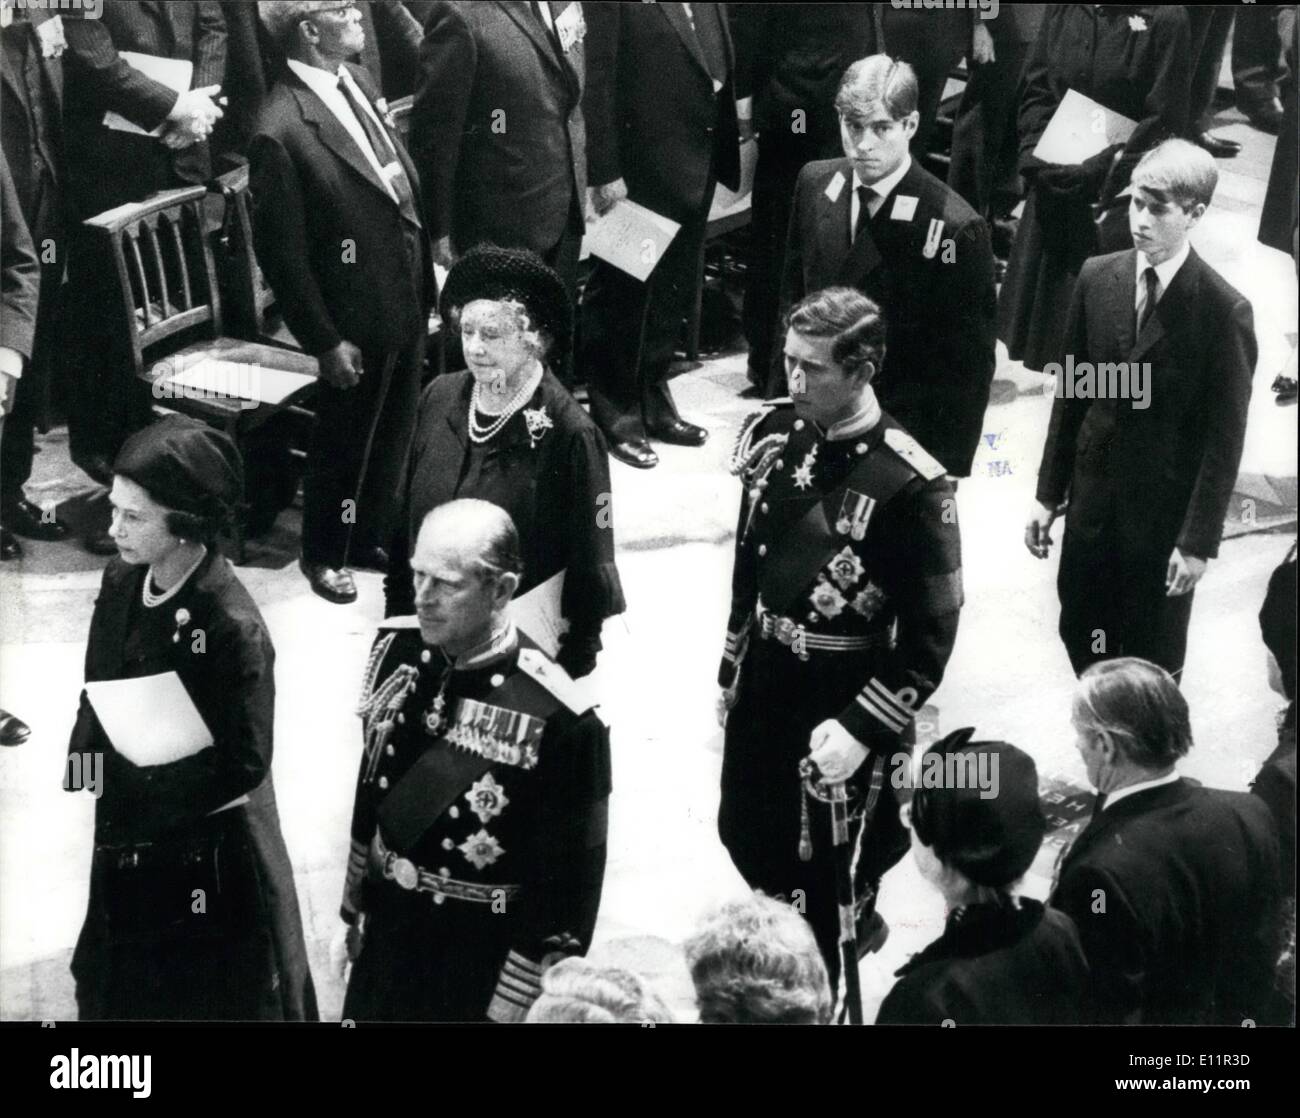 Sep. 09, 1979 - Funeral of Lord Mountbatten. H.M. The Queen and Prince Philip followed by Queen Elizabeth the Queen Mother, Prince Charles, Prince Andrew (wearing his naval uniform for the first time), and Prince Edward, as they arrived inside Westminster Abbey for the funeral. Stock Photo